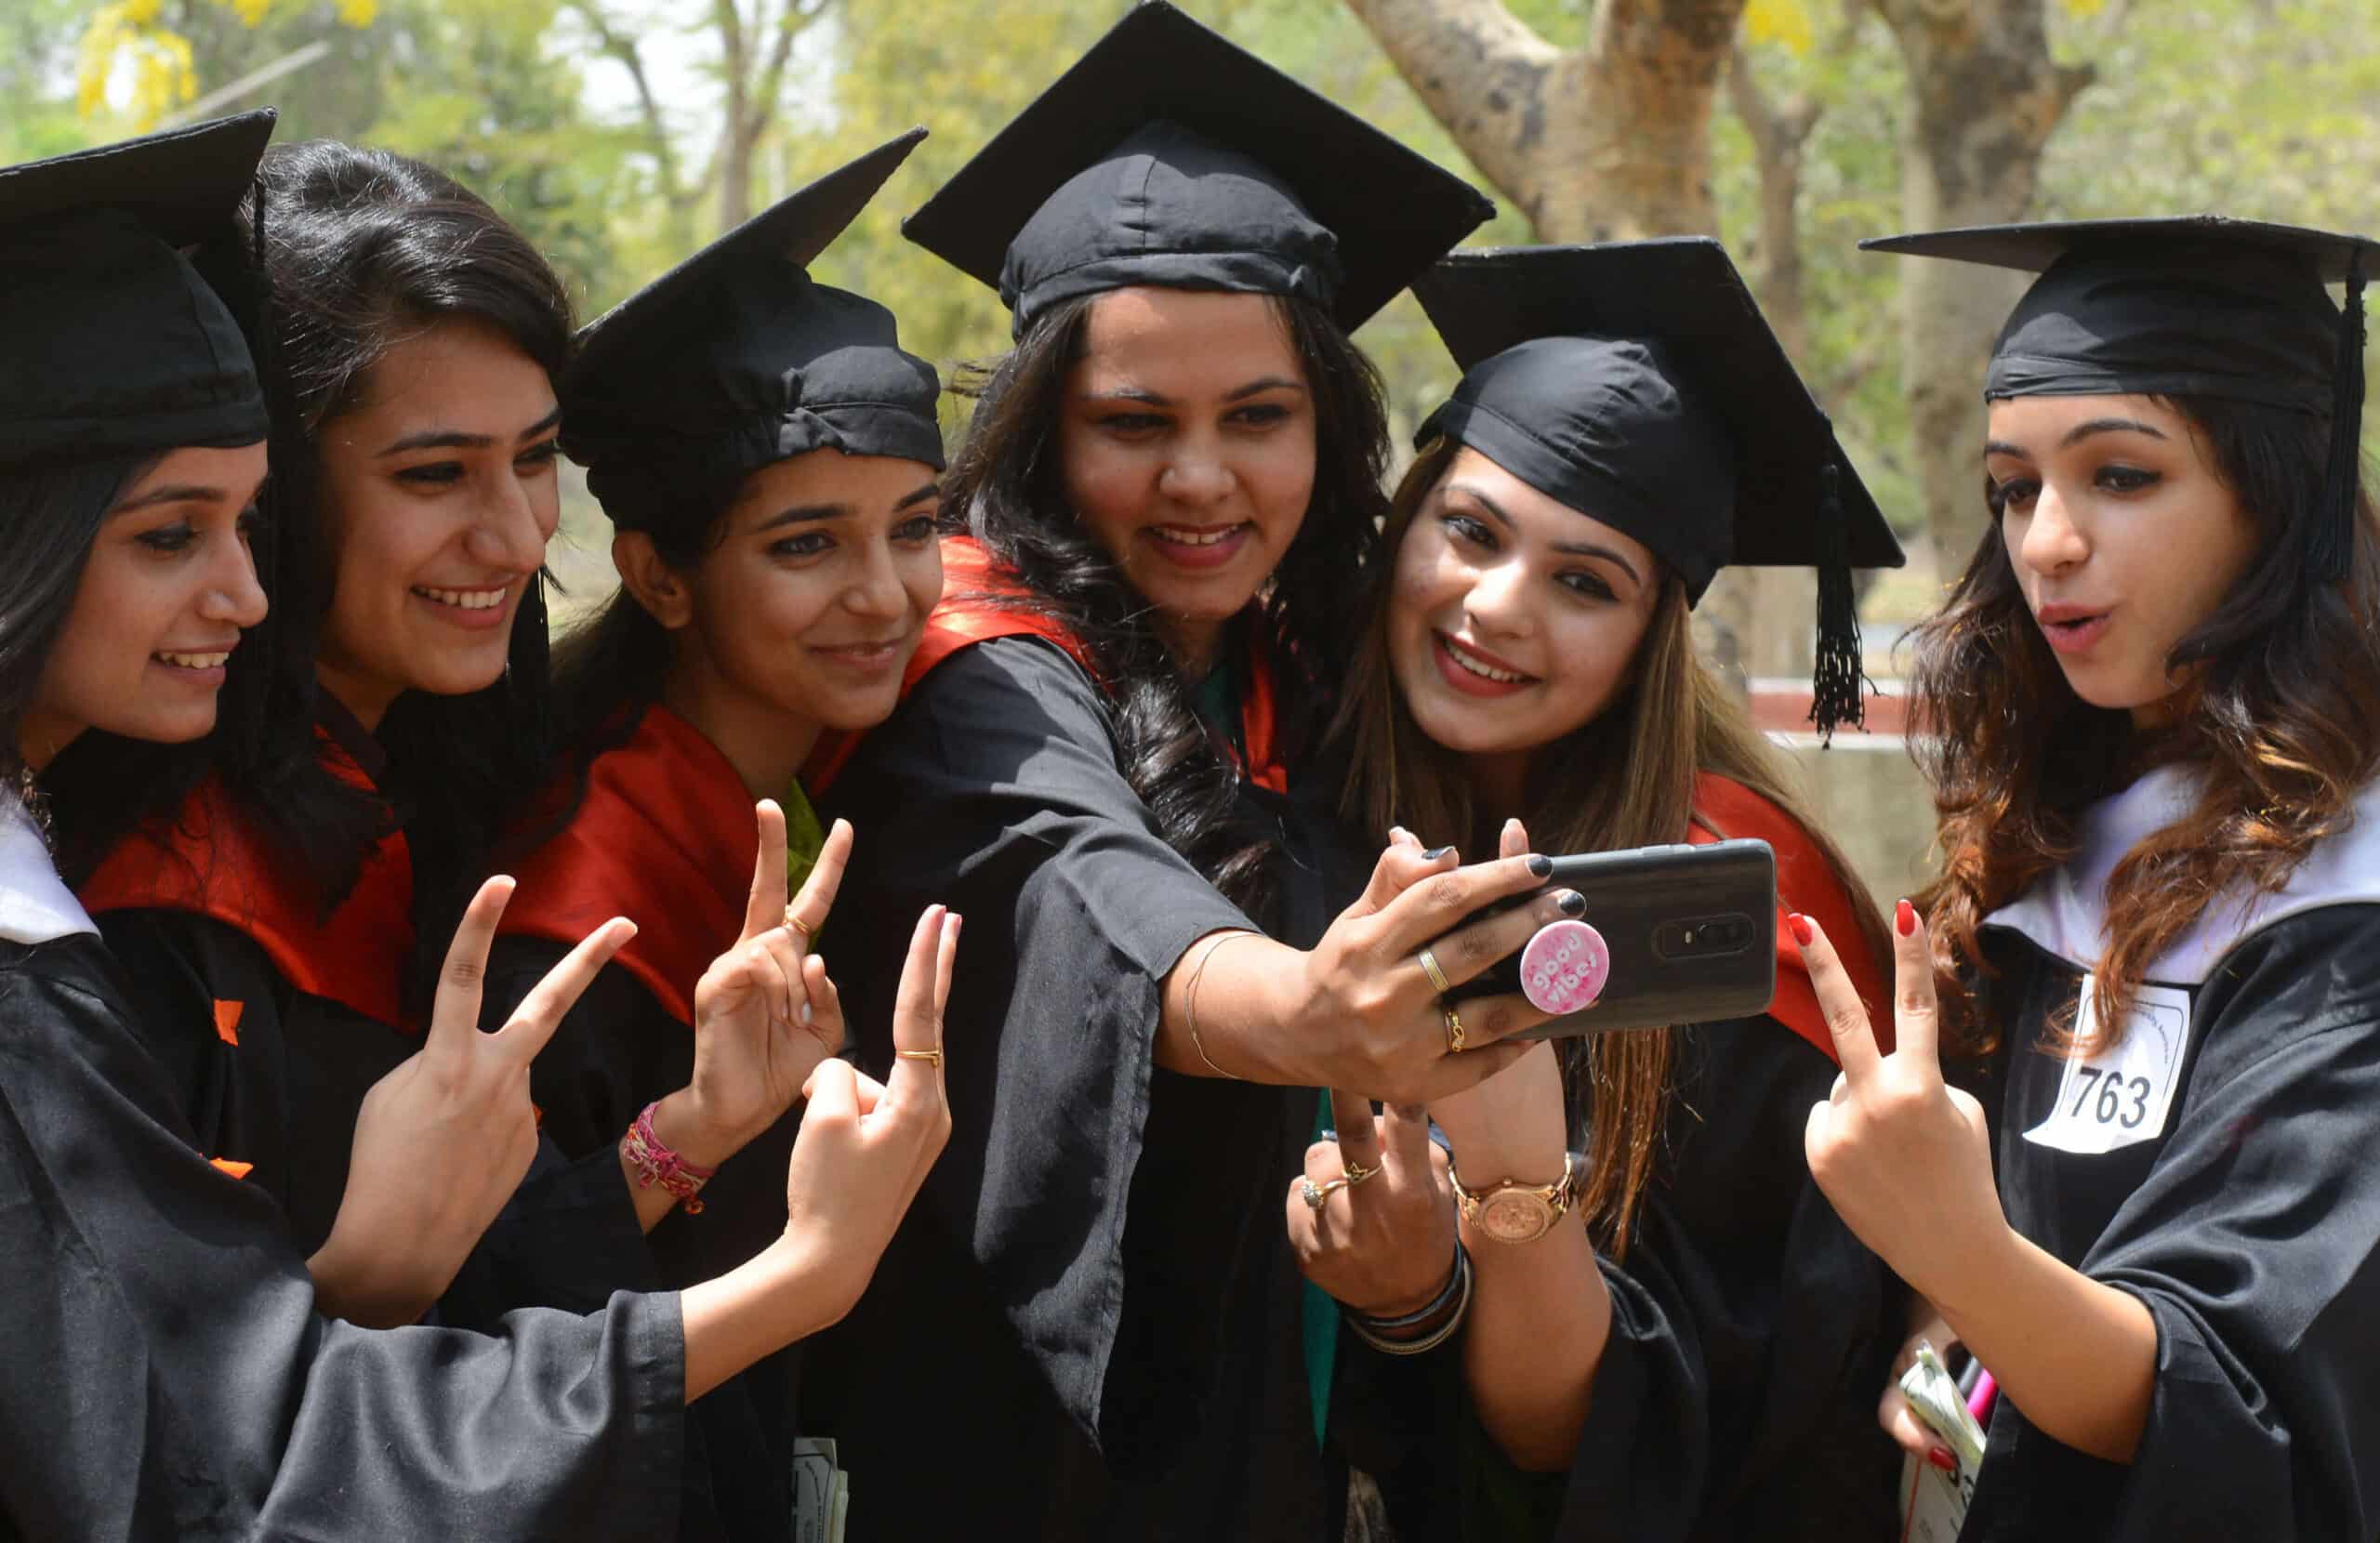 Stay or go: Comparing India's top universities with the rest of the world